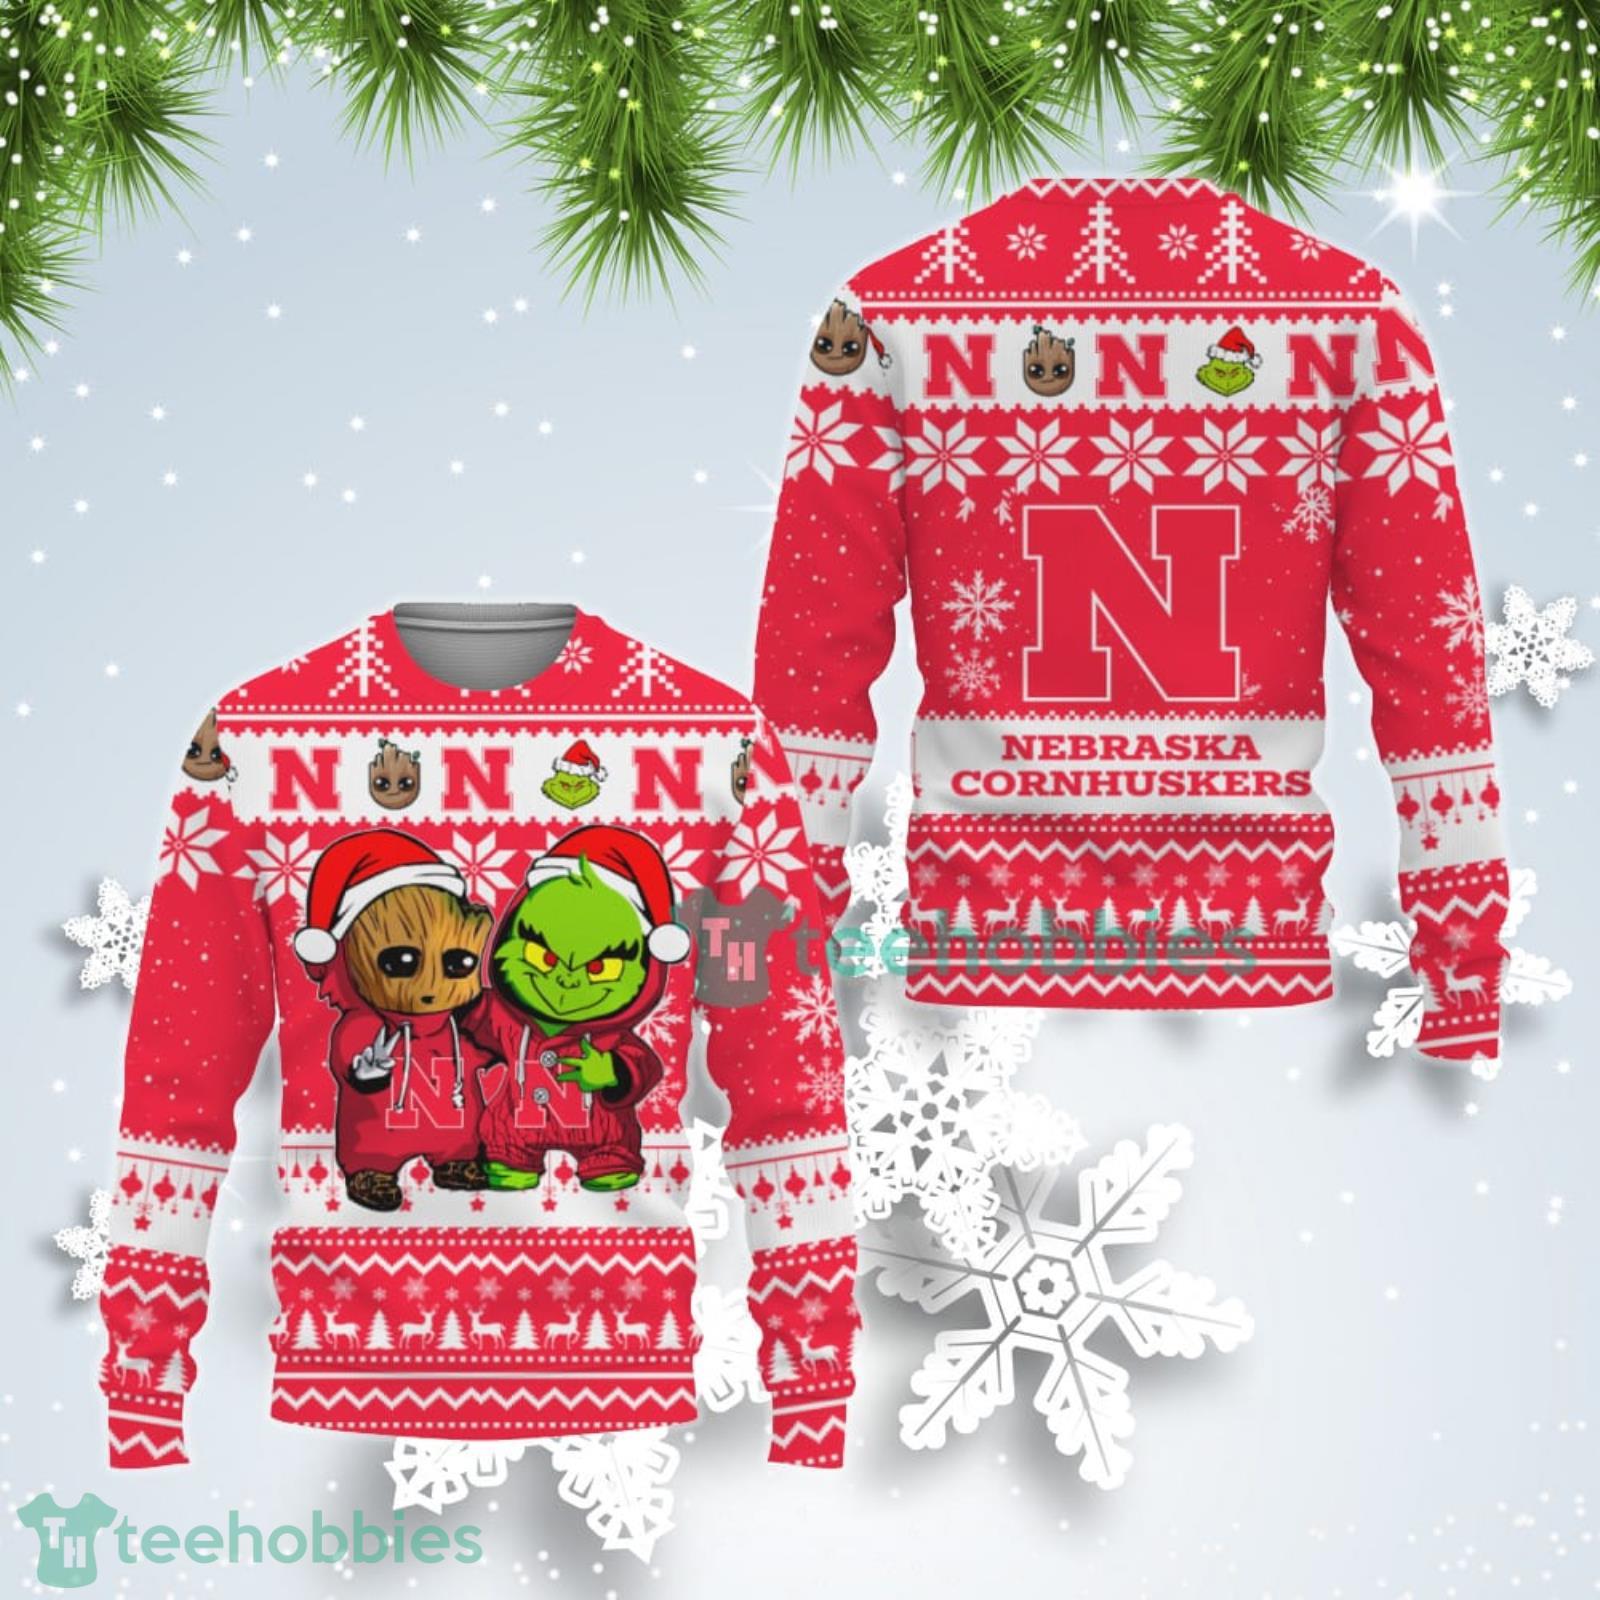 Nebraska Cornhuskers Baby Groot And Grinch Best Friends Ugly Christmas Sweater Product Photo 1